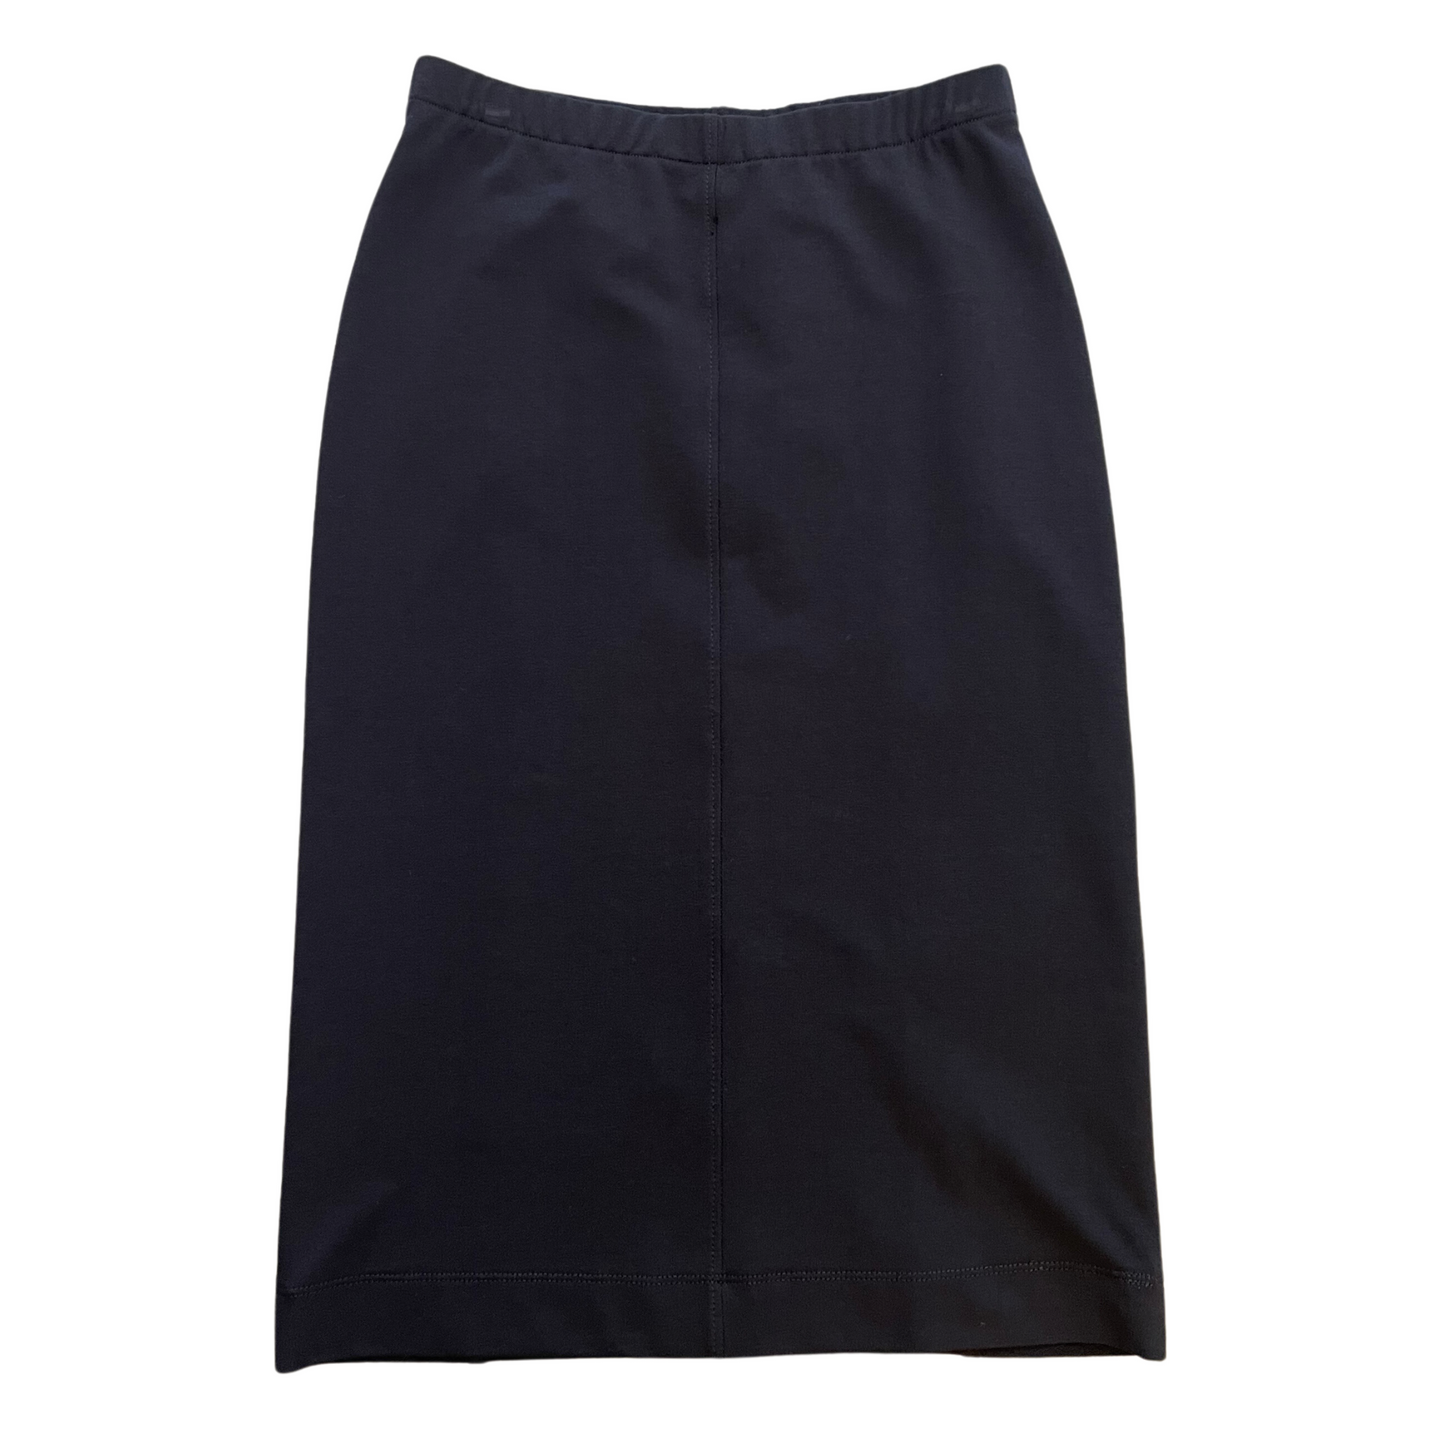 POINTY Skirt Long - Pure Black - Made on demand